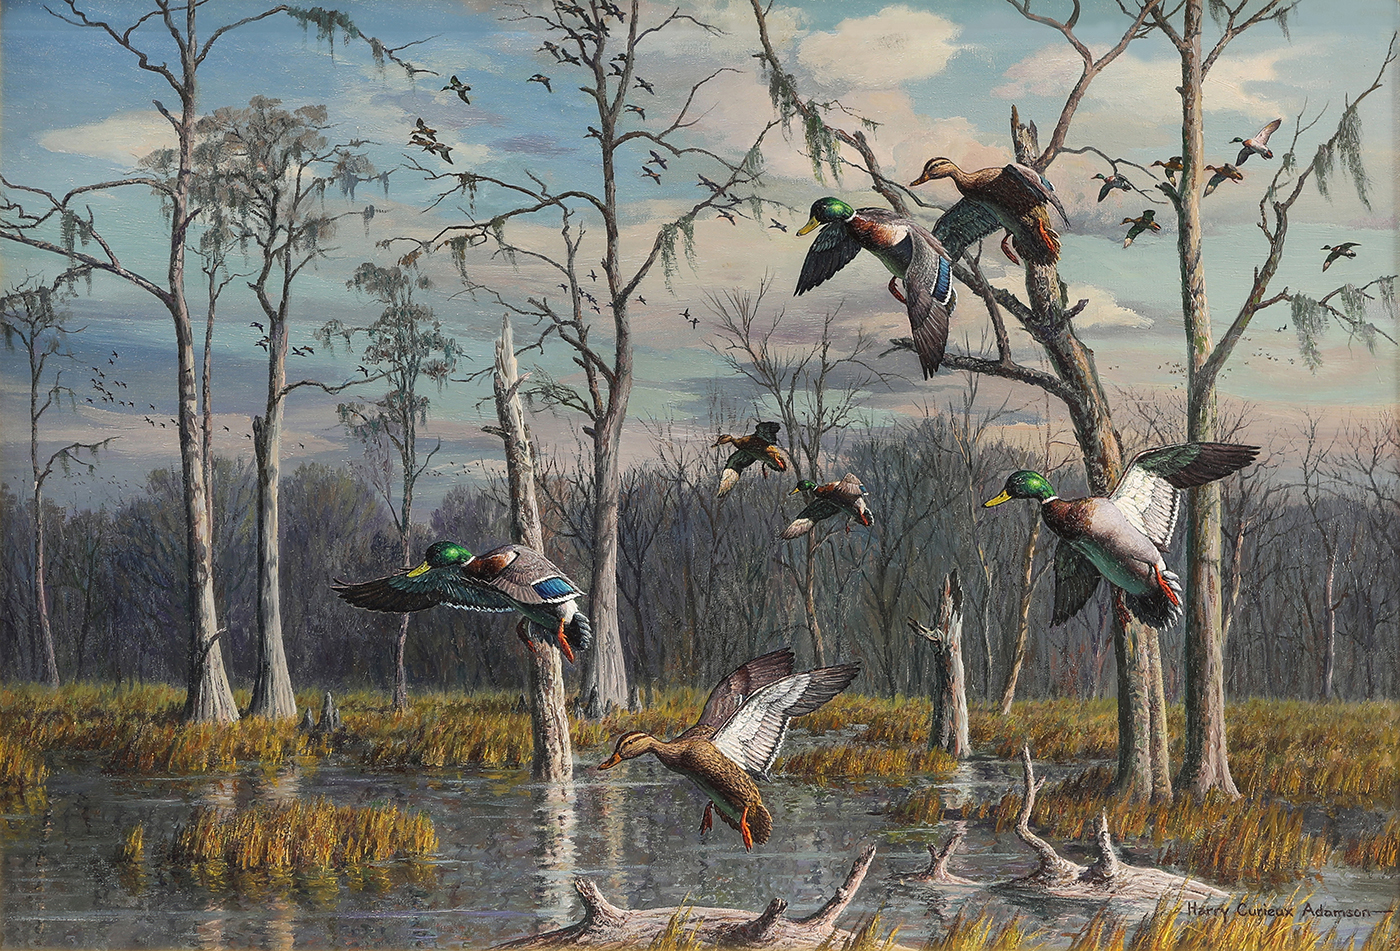 Harry Curieux Adamson (American, 1916–2012), Flooded Timber Mallards, oil on canvas board, 24" x 36".Estimate: $10,000–$15,000